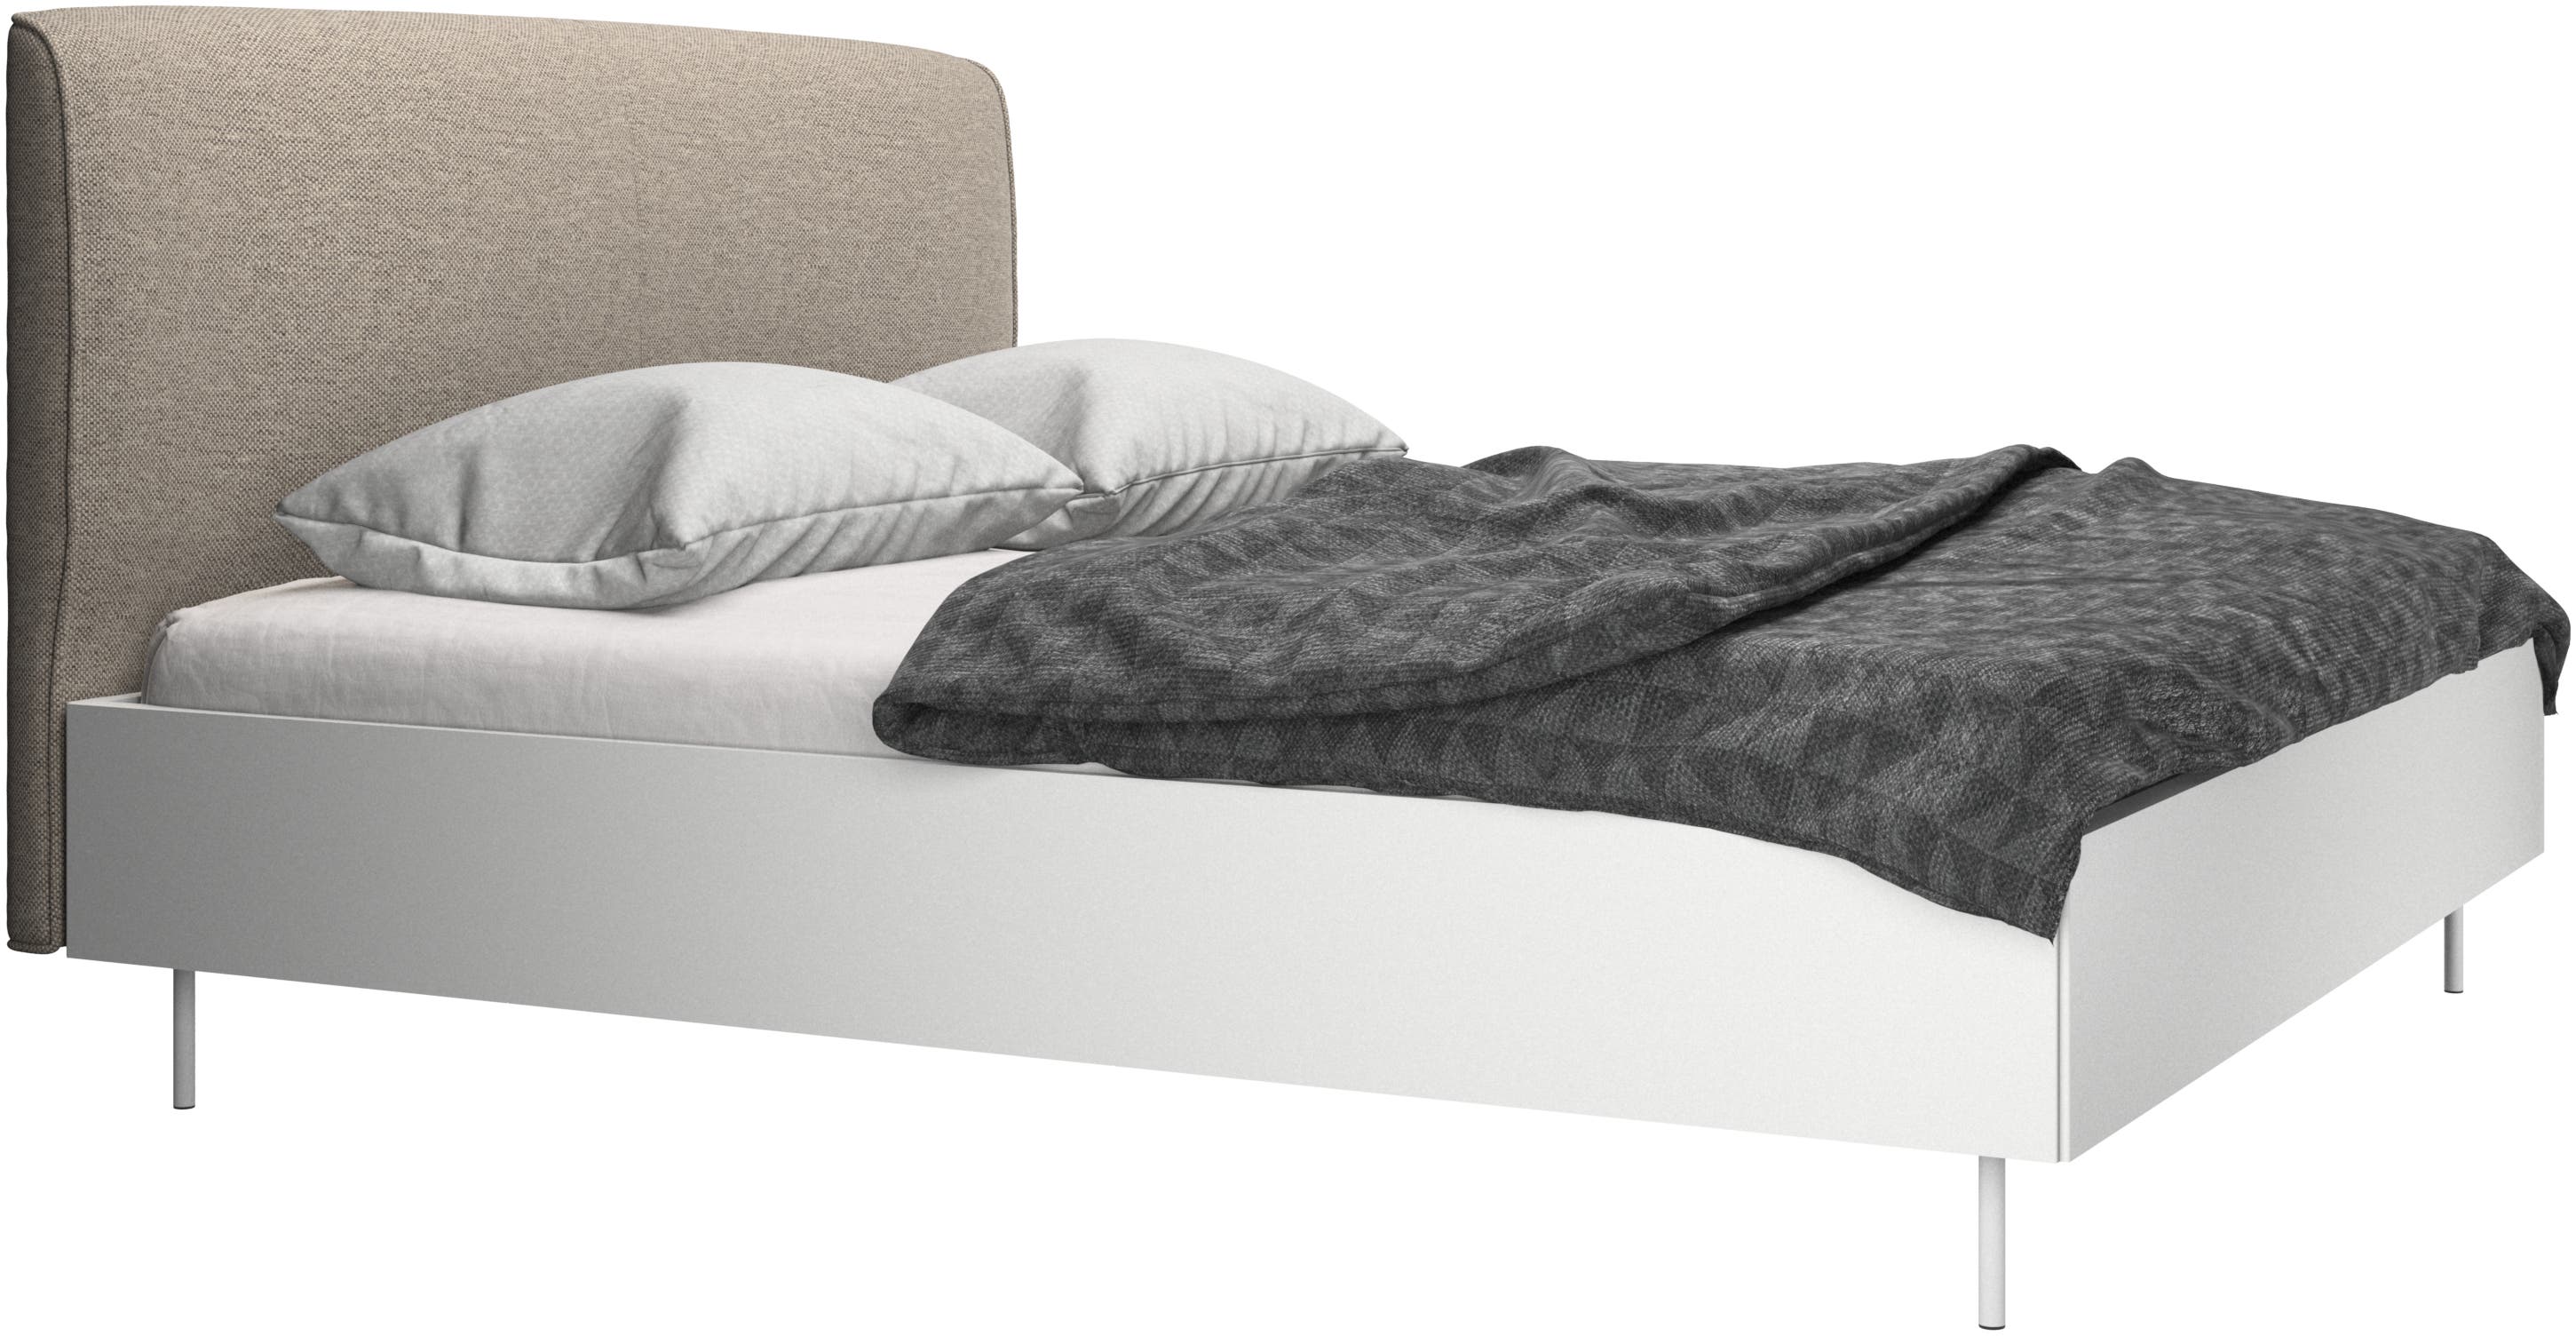 Houston bed, excl. mattress